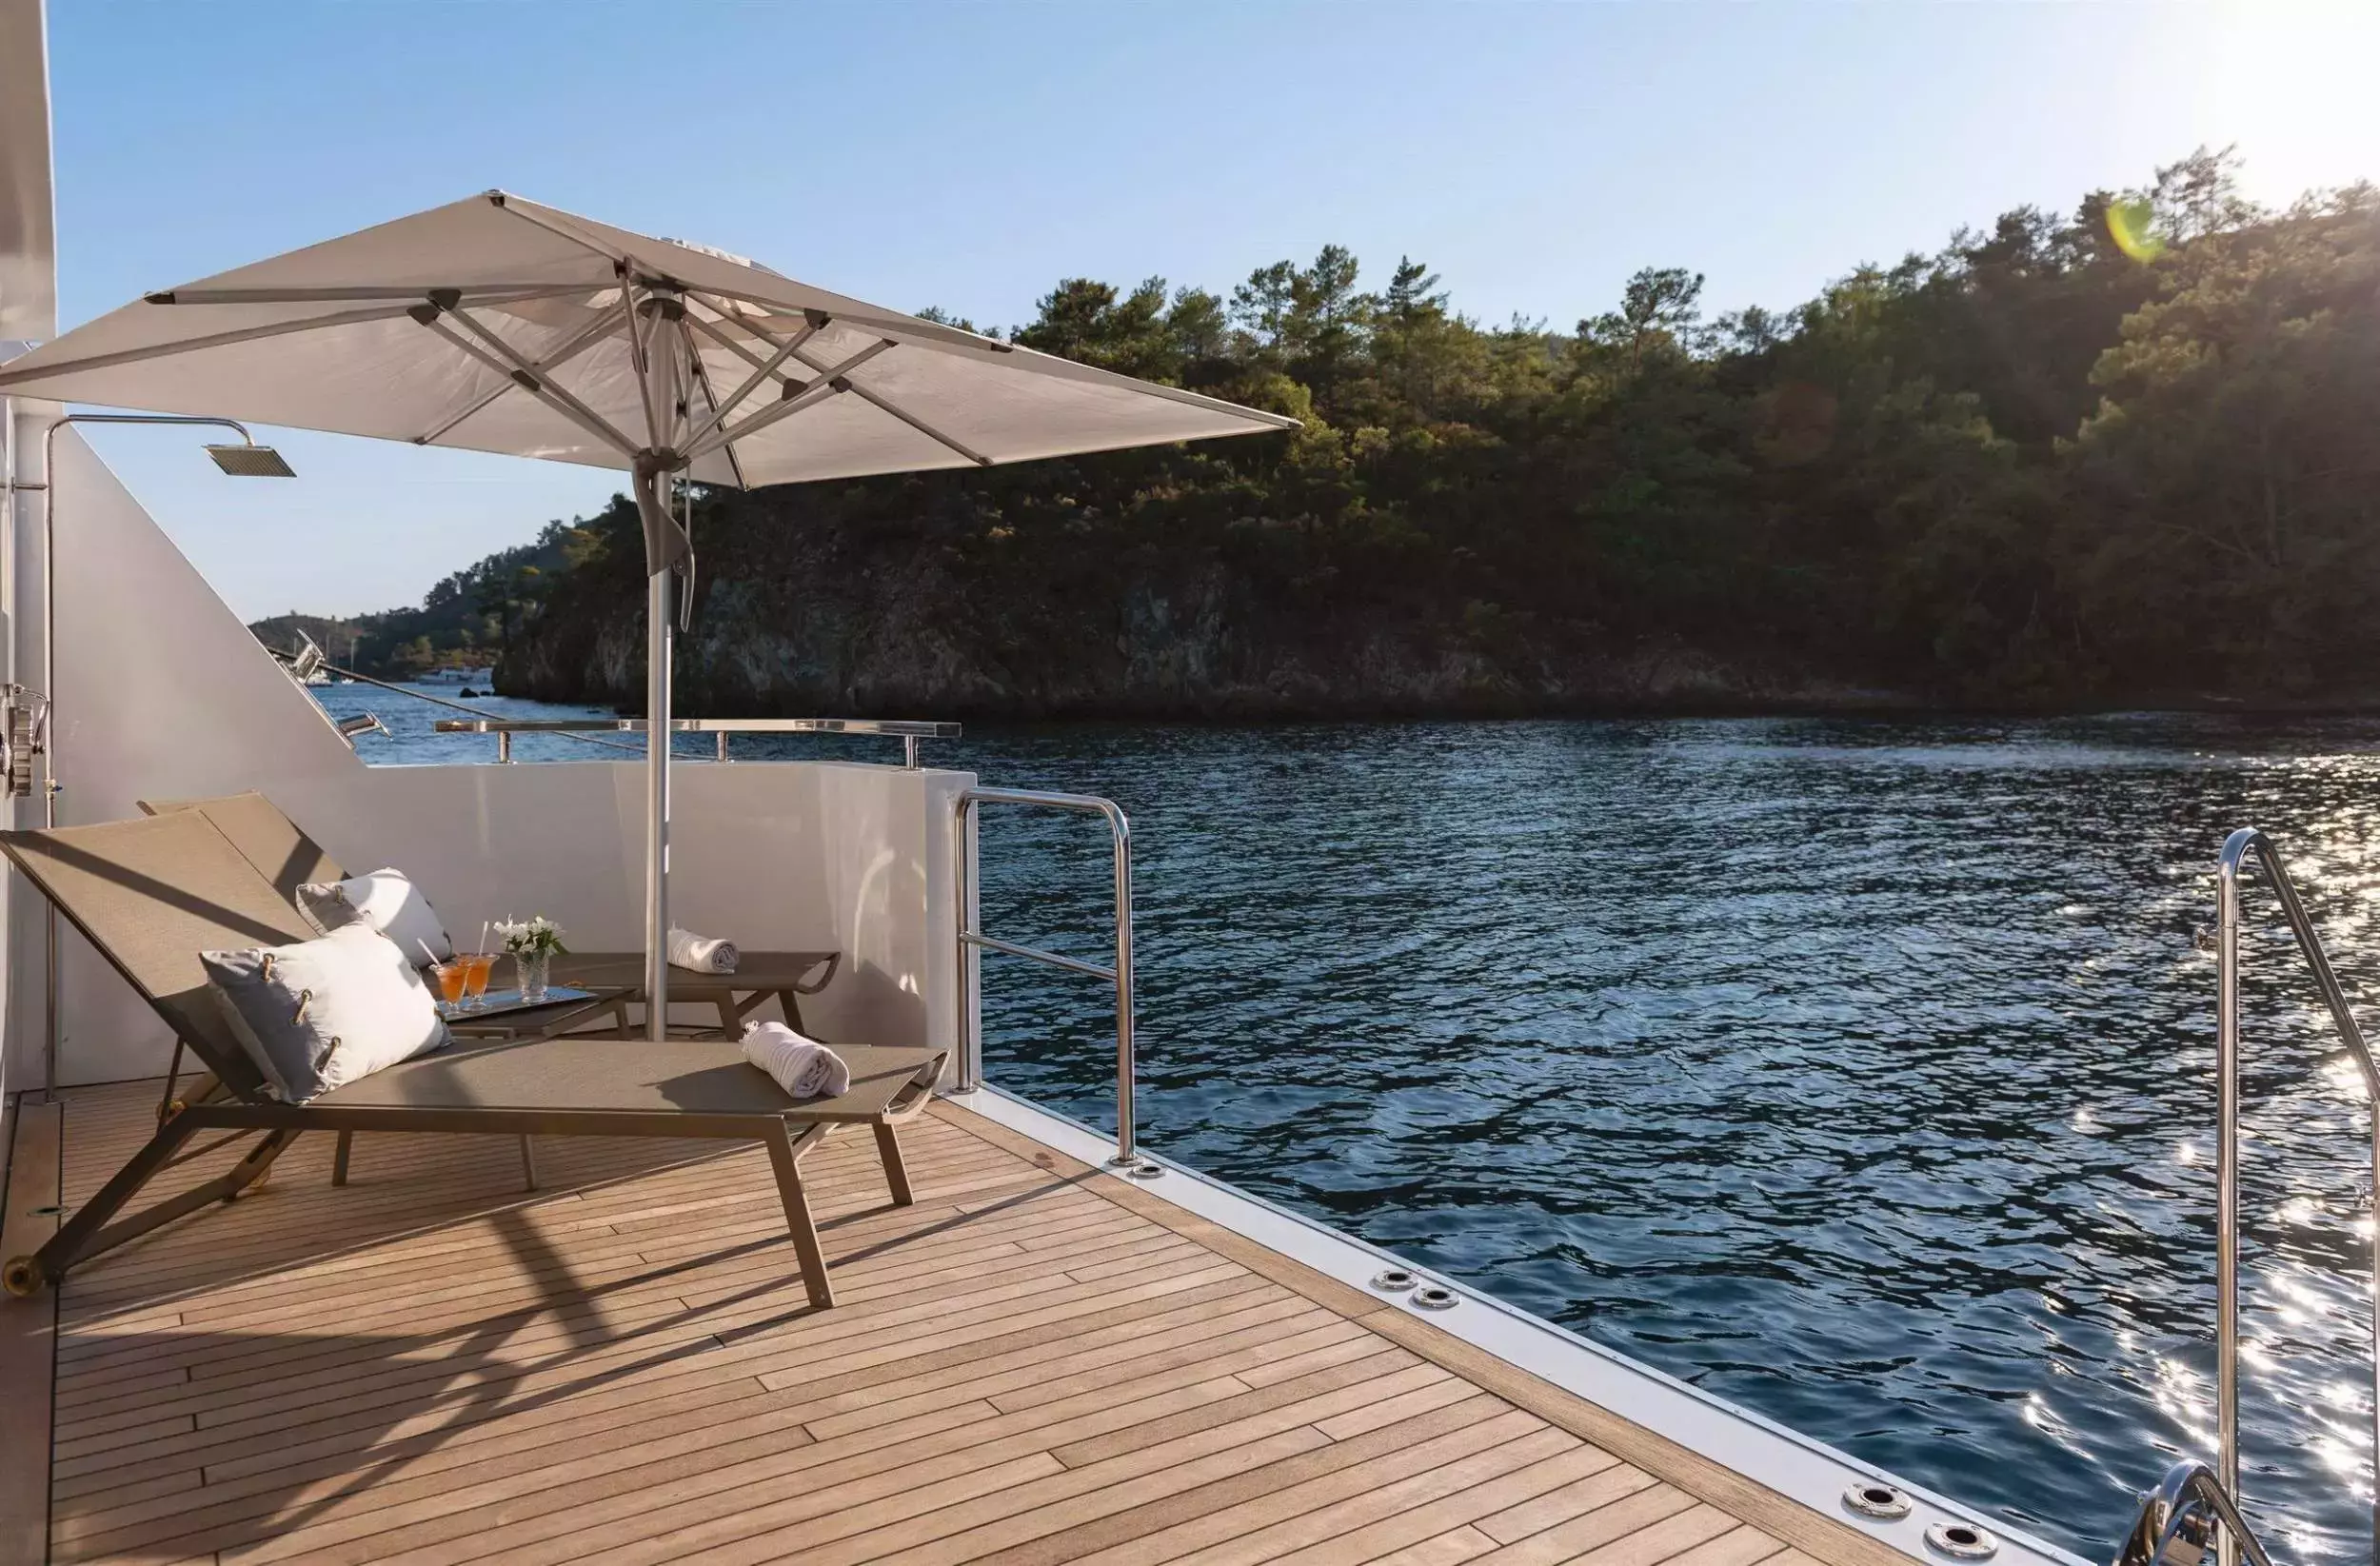 Adamaris by Mengi Yay - Top rates for a Rental of a private Superyacht in Turkey